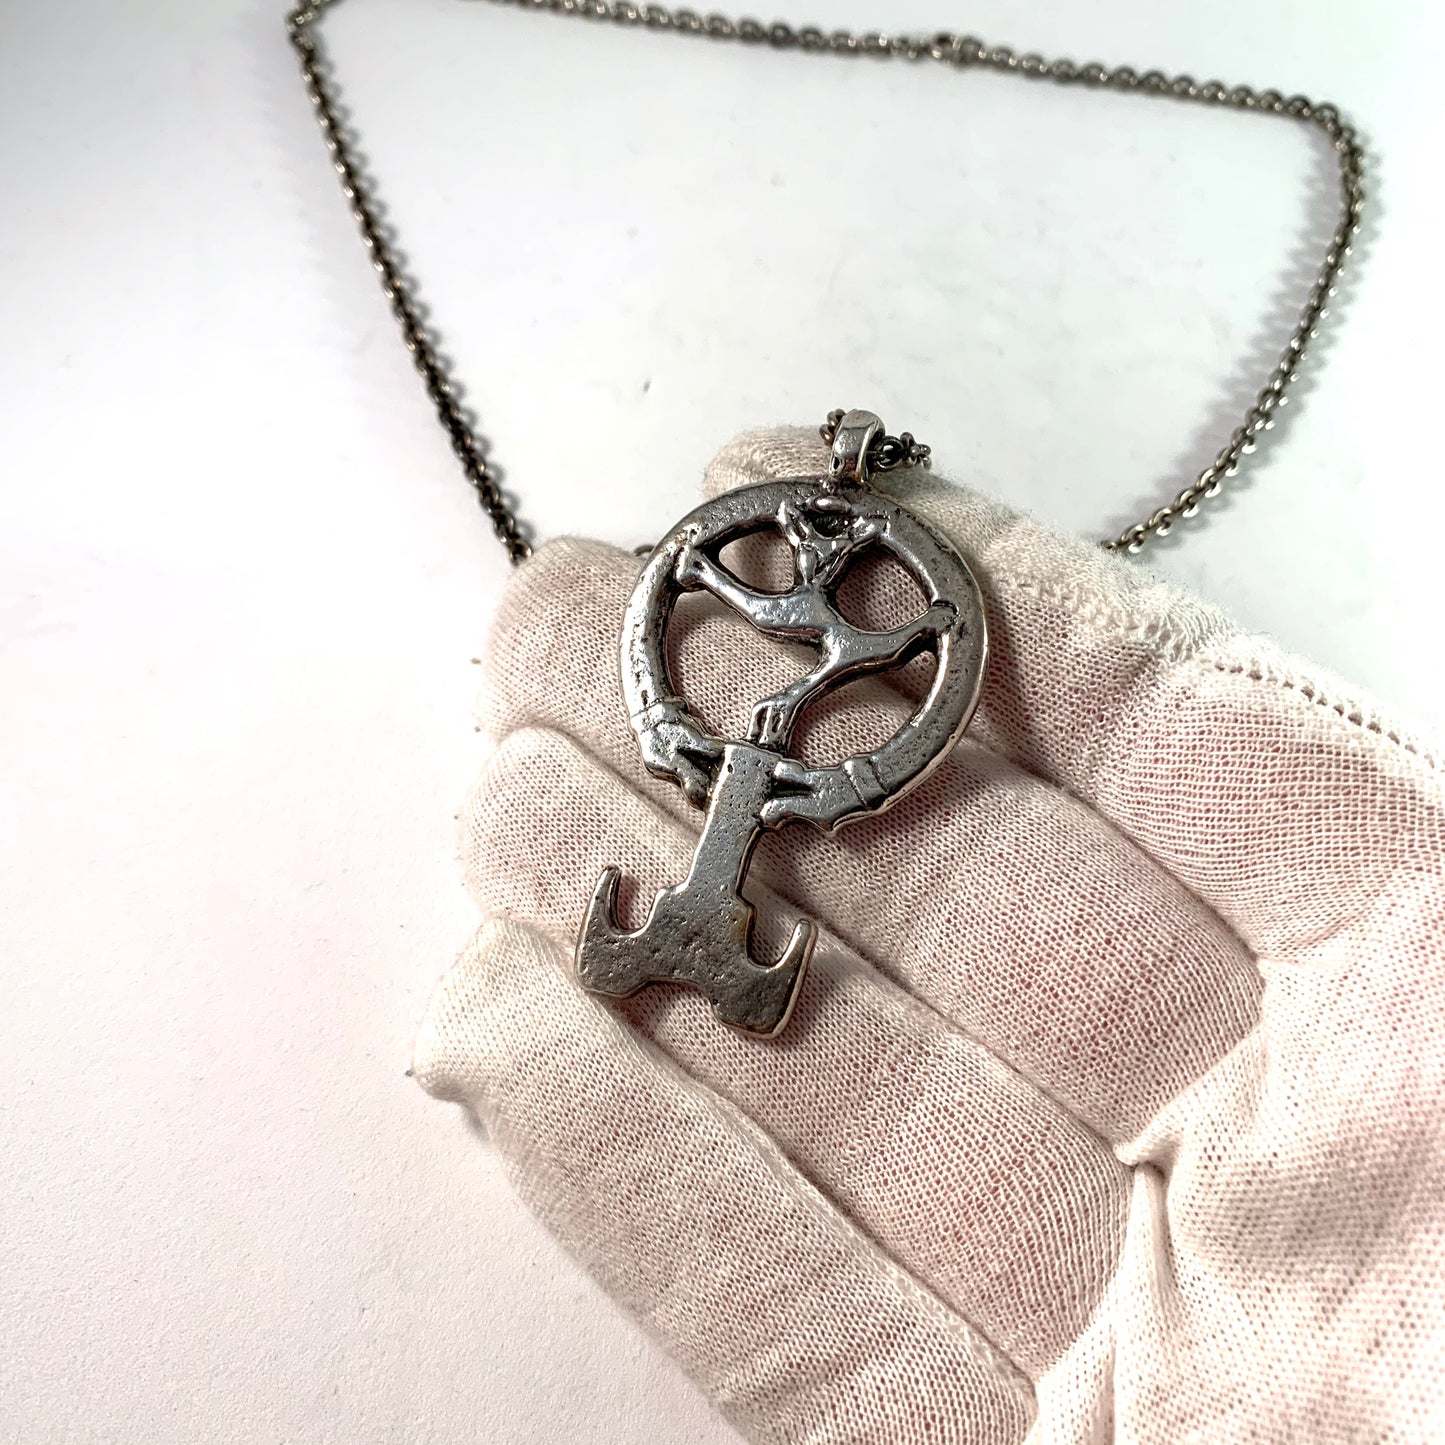 W A Bolin, Sweden 1969 Sterling Viking Copy Key to Valhalla Pendant Necklace.